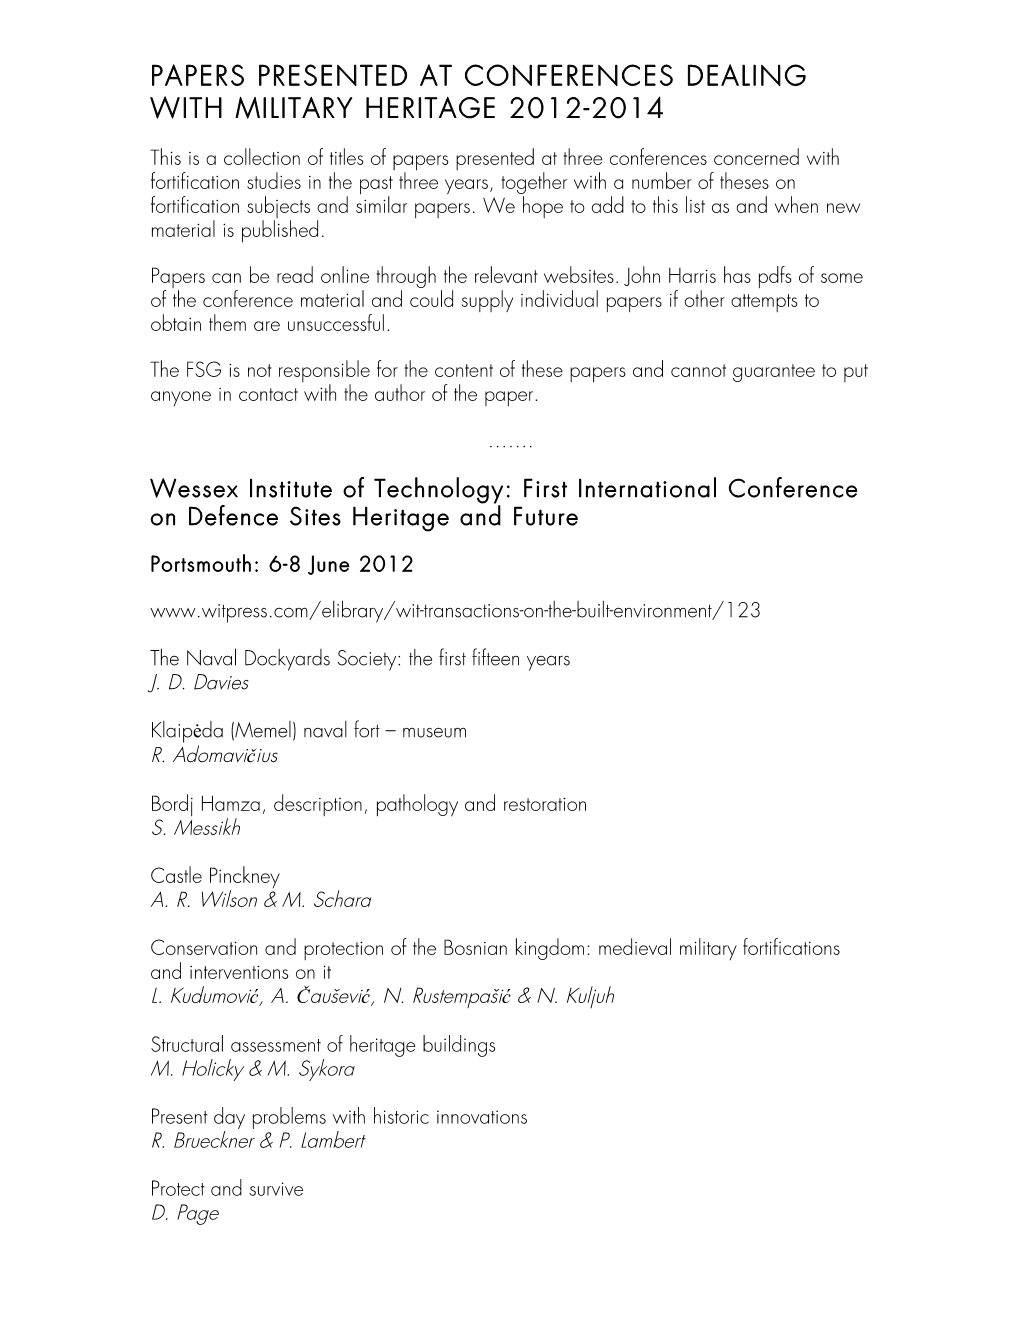 Papers Presented at Conferences Dealing with Military Heritage 2012-2014